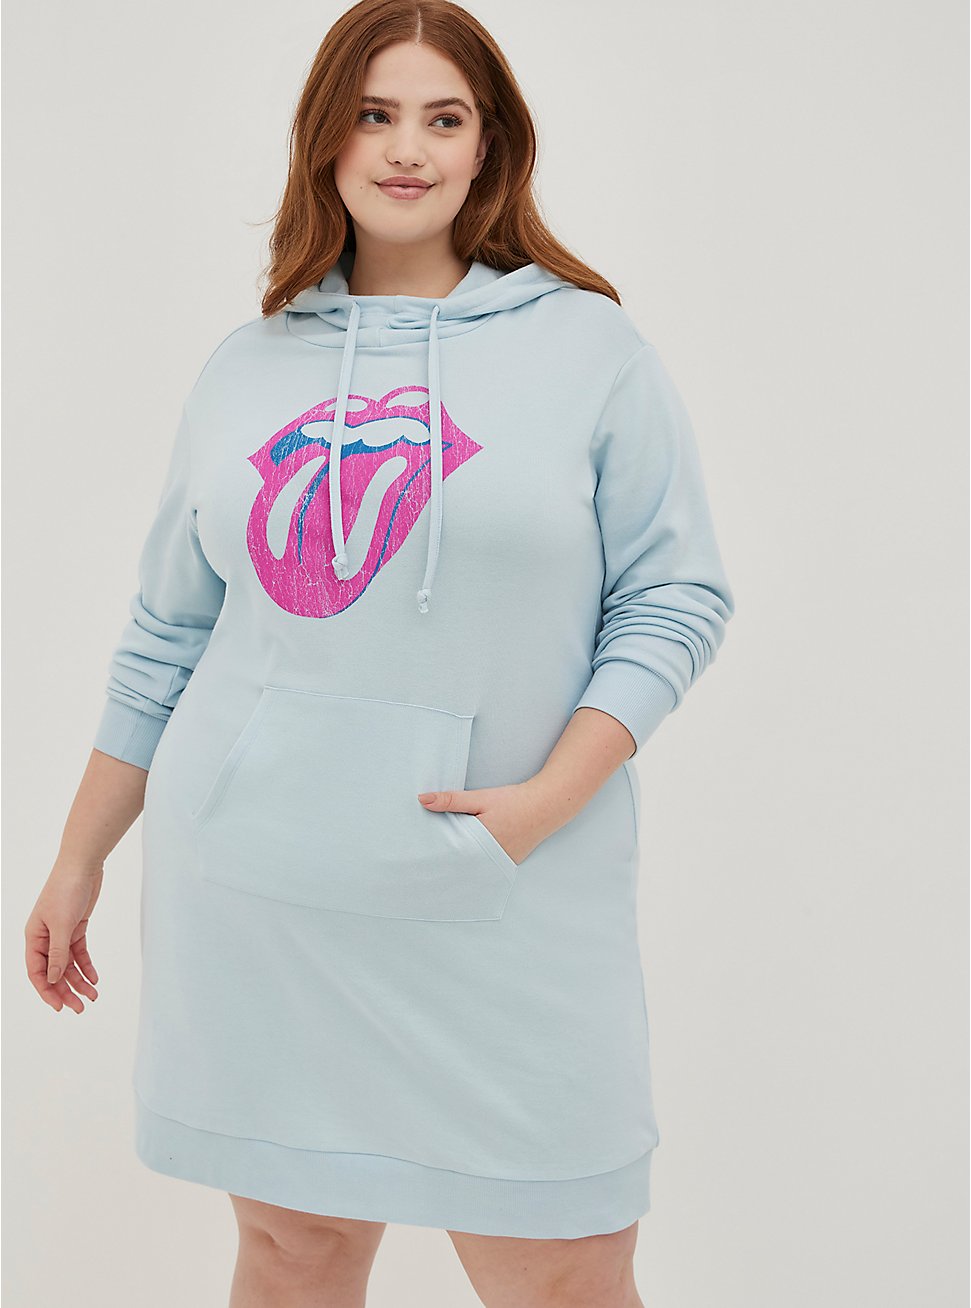 Hoodie Dress - Lightweight French Terry Rolling Stones Light Blue, LIGHT BLUE, hi-res